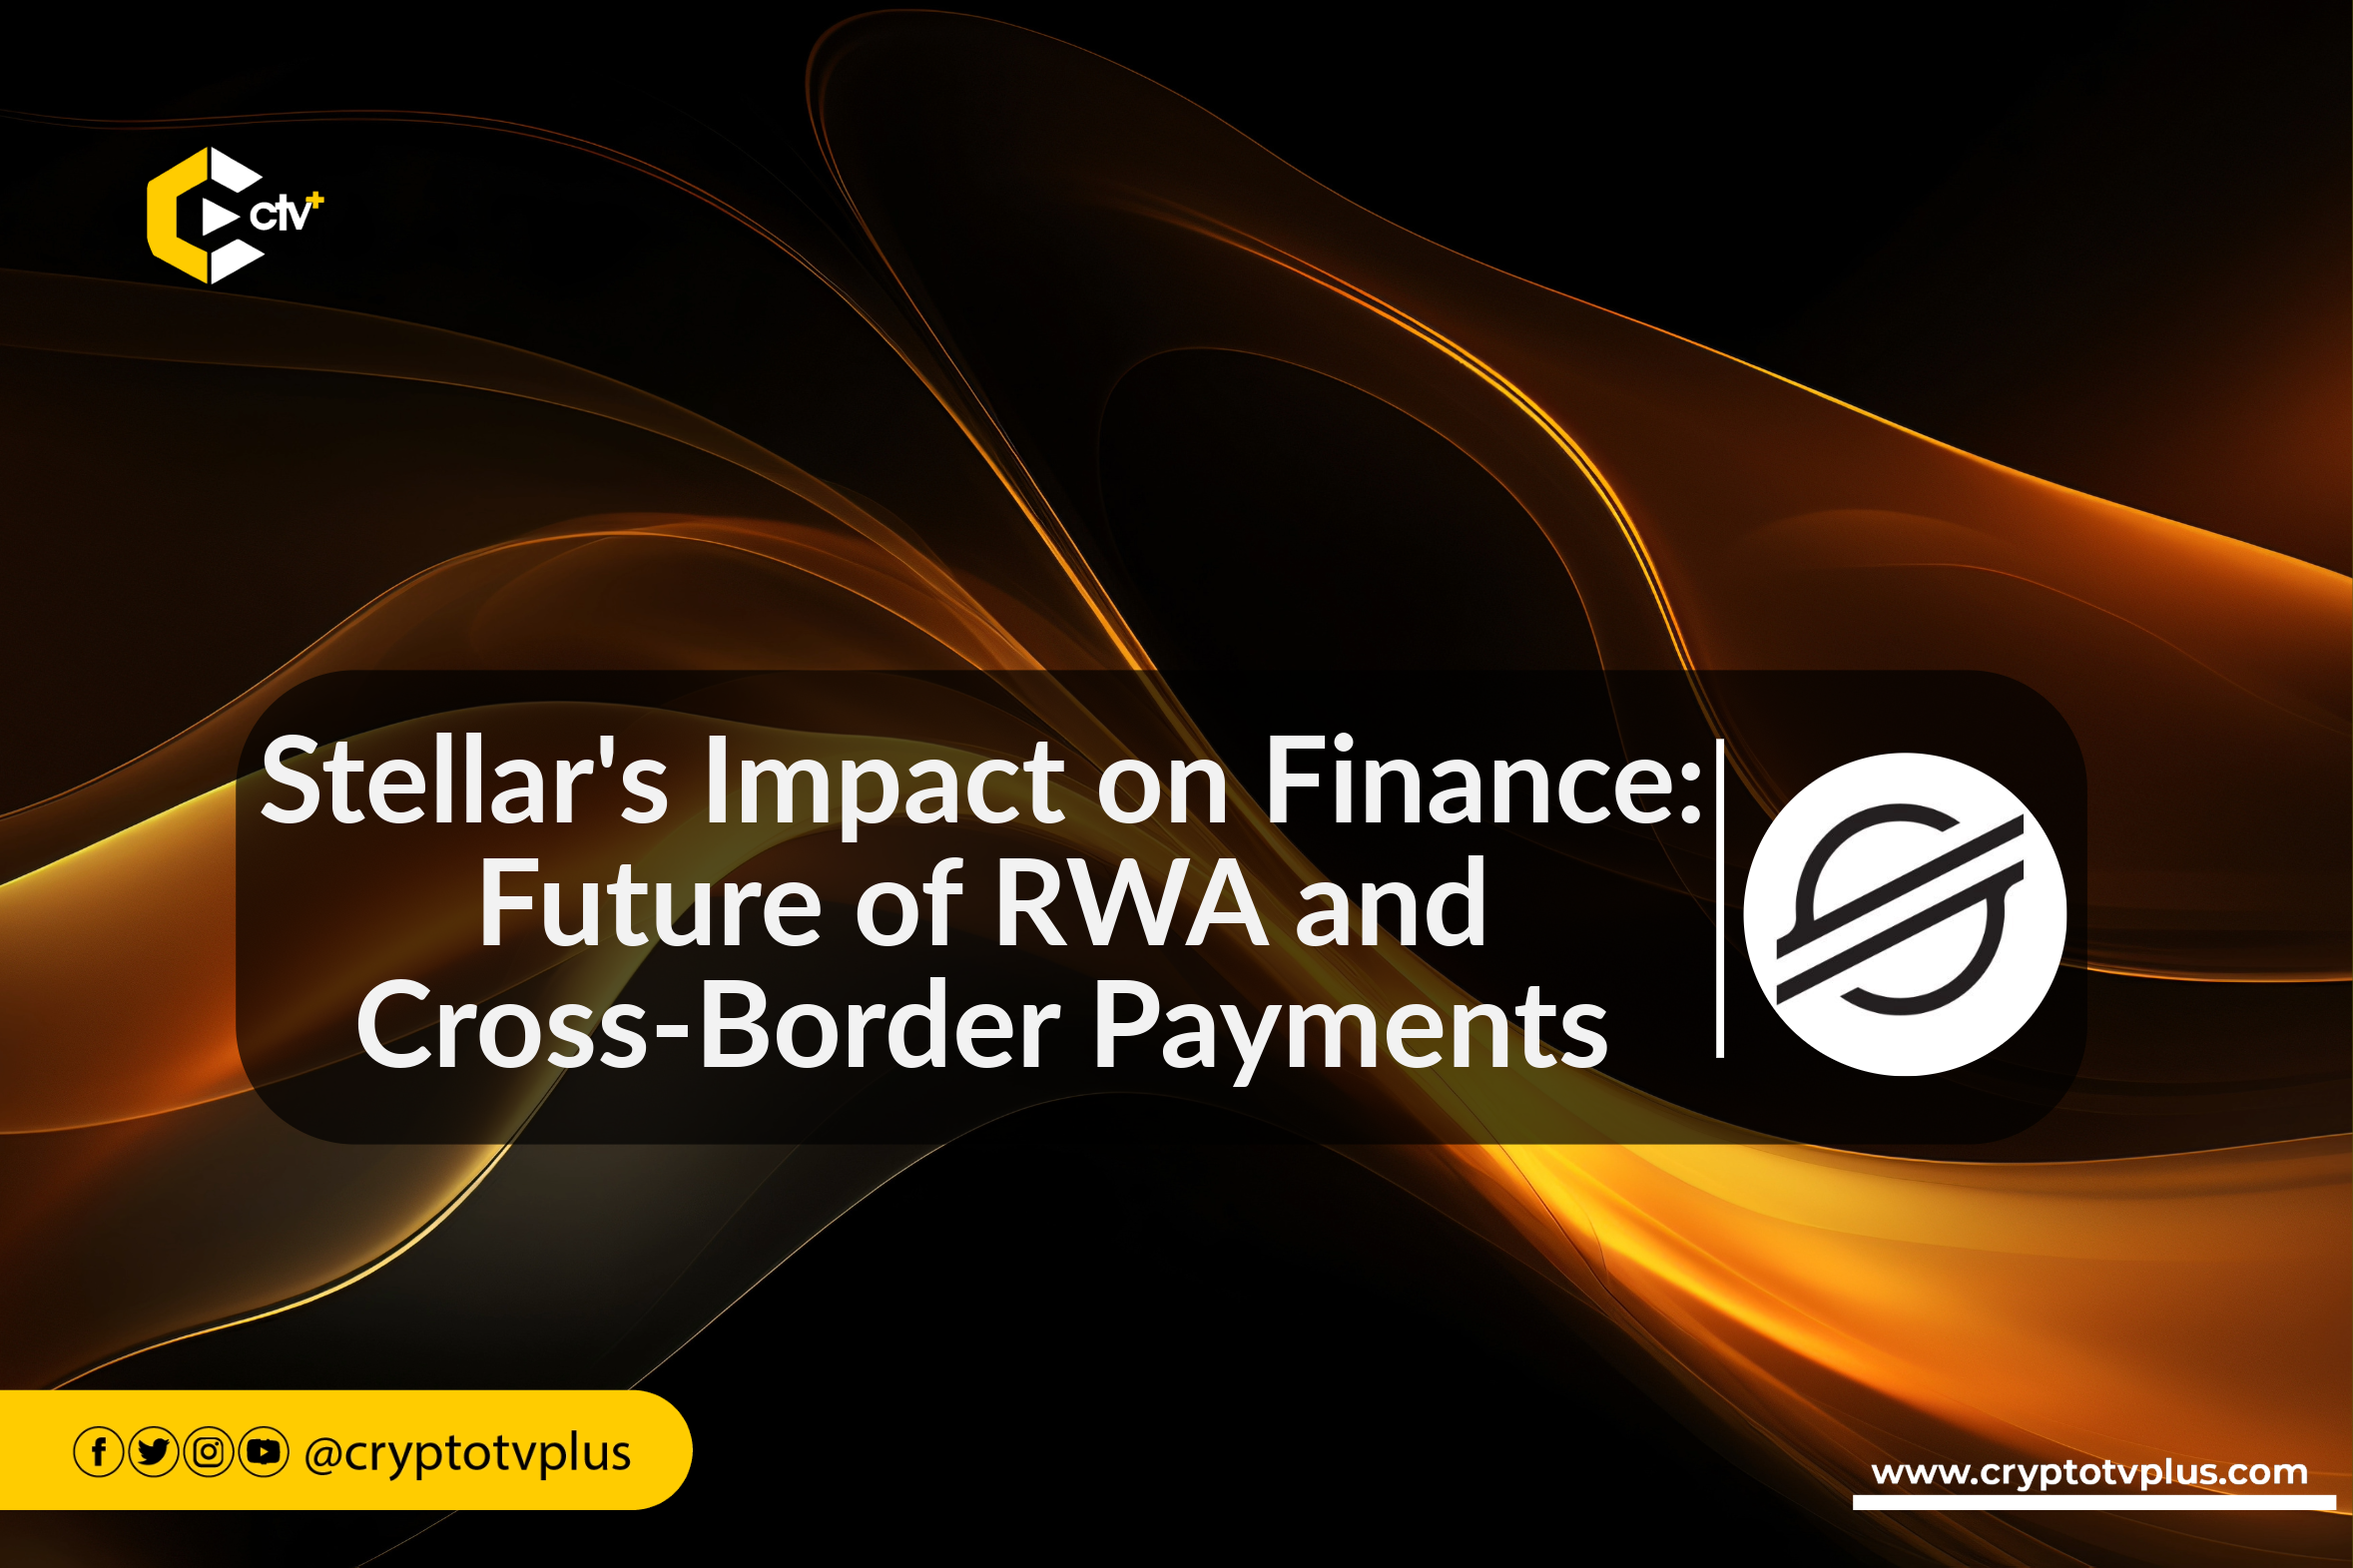 Stellar's Impact on Finance: Future of RWA and Cross-Border Payments